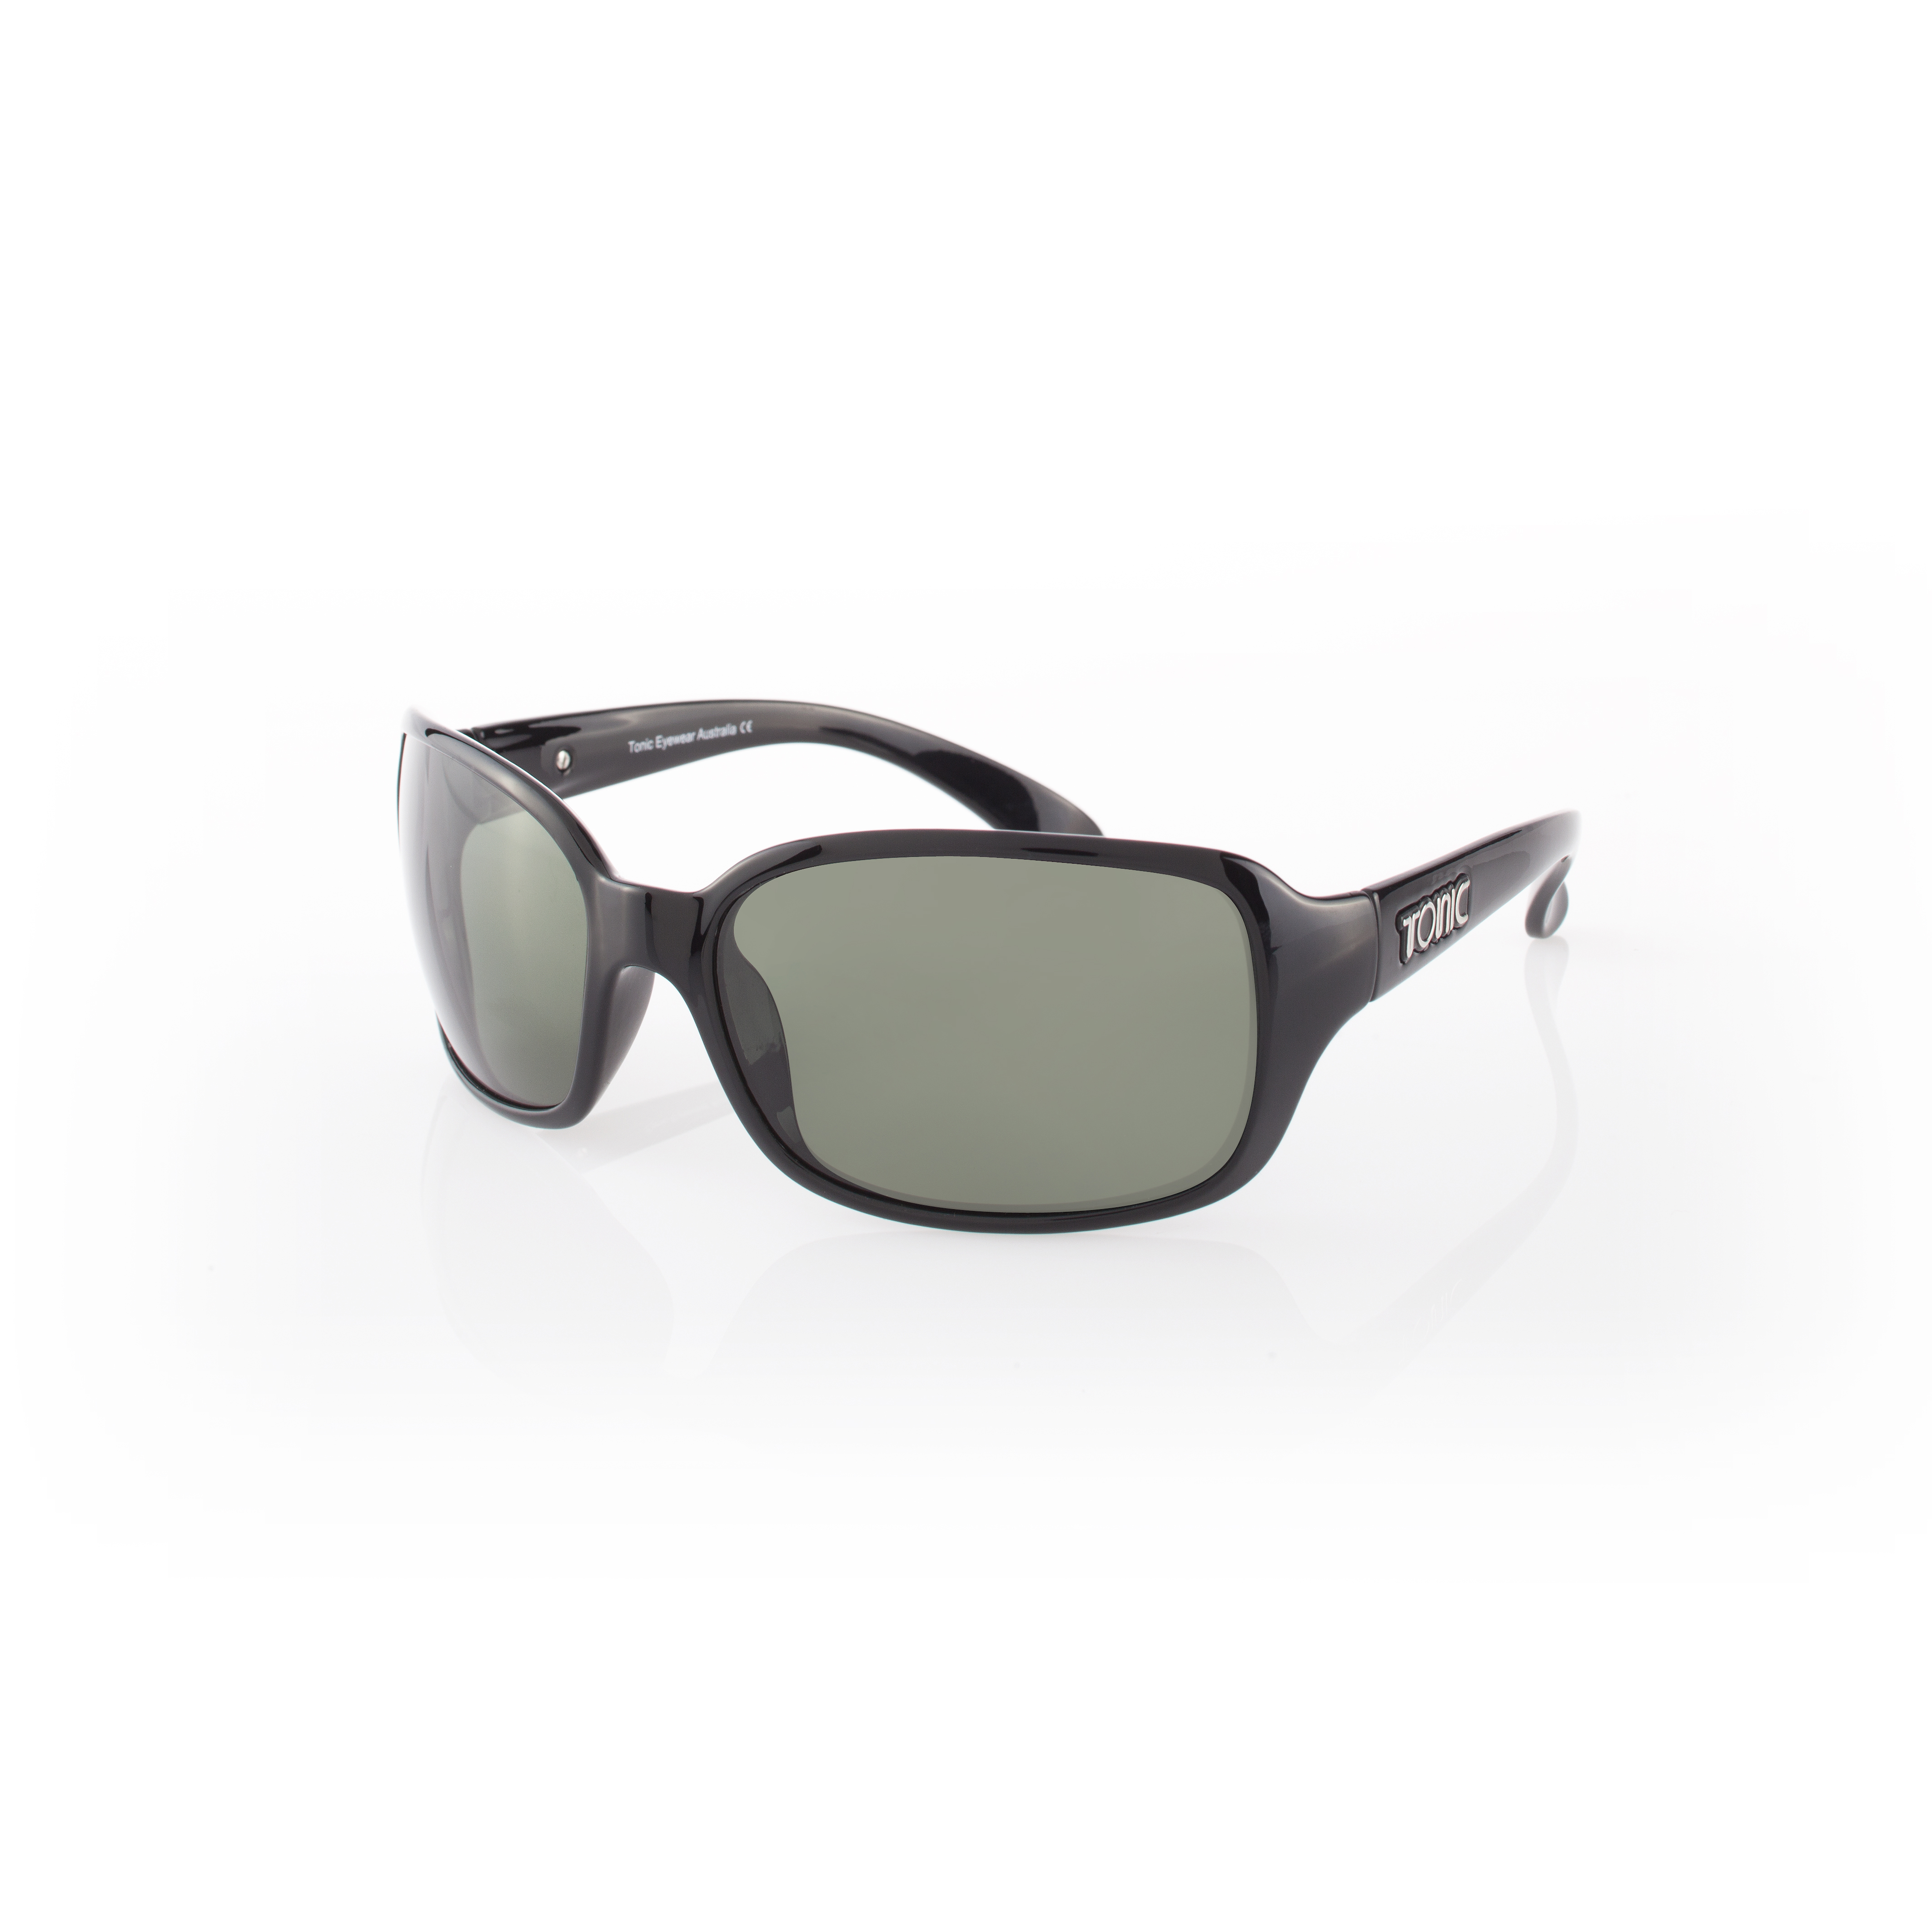 Cove Photochromic Grey | Photochromic Lenses | Compare Us To Spotters ...